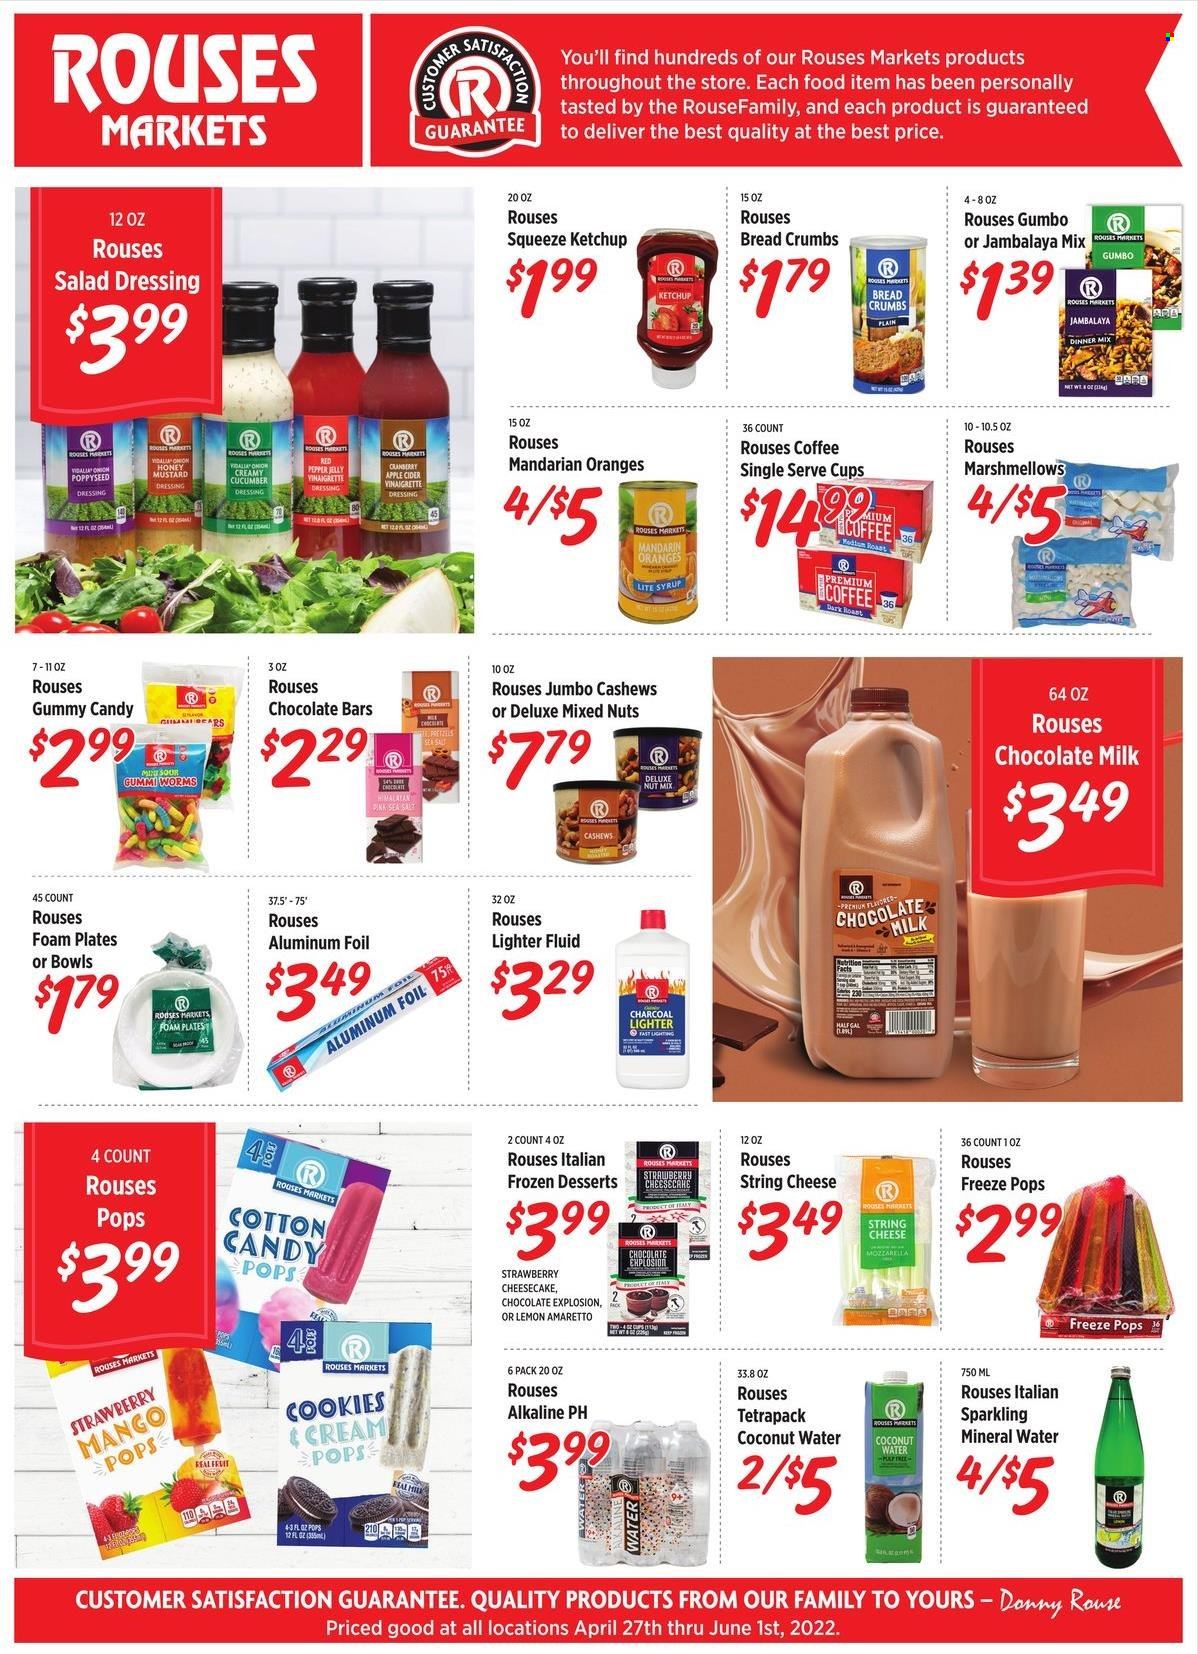 thumbnail - Rouses Markets Flyer - 04/27/2022 - 06/01/2022 - Sales products - cheesecake, breadcrumbs, onion, mandarines, mango, oranges, string cheese, milk, cookies, milk chocolate, jelly, cotton candy, chocolate bar, sea salt, pepper, mustard, salad dressing, vinaigrette dressing, ketchup, dressing, syrup, cashews, mixed nuts, coconut water, mineral water, sparkling water, coffee, Amaretto, apple cider, cider, aluminium foil, foam plates. Page 1.